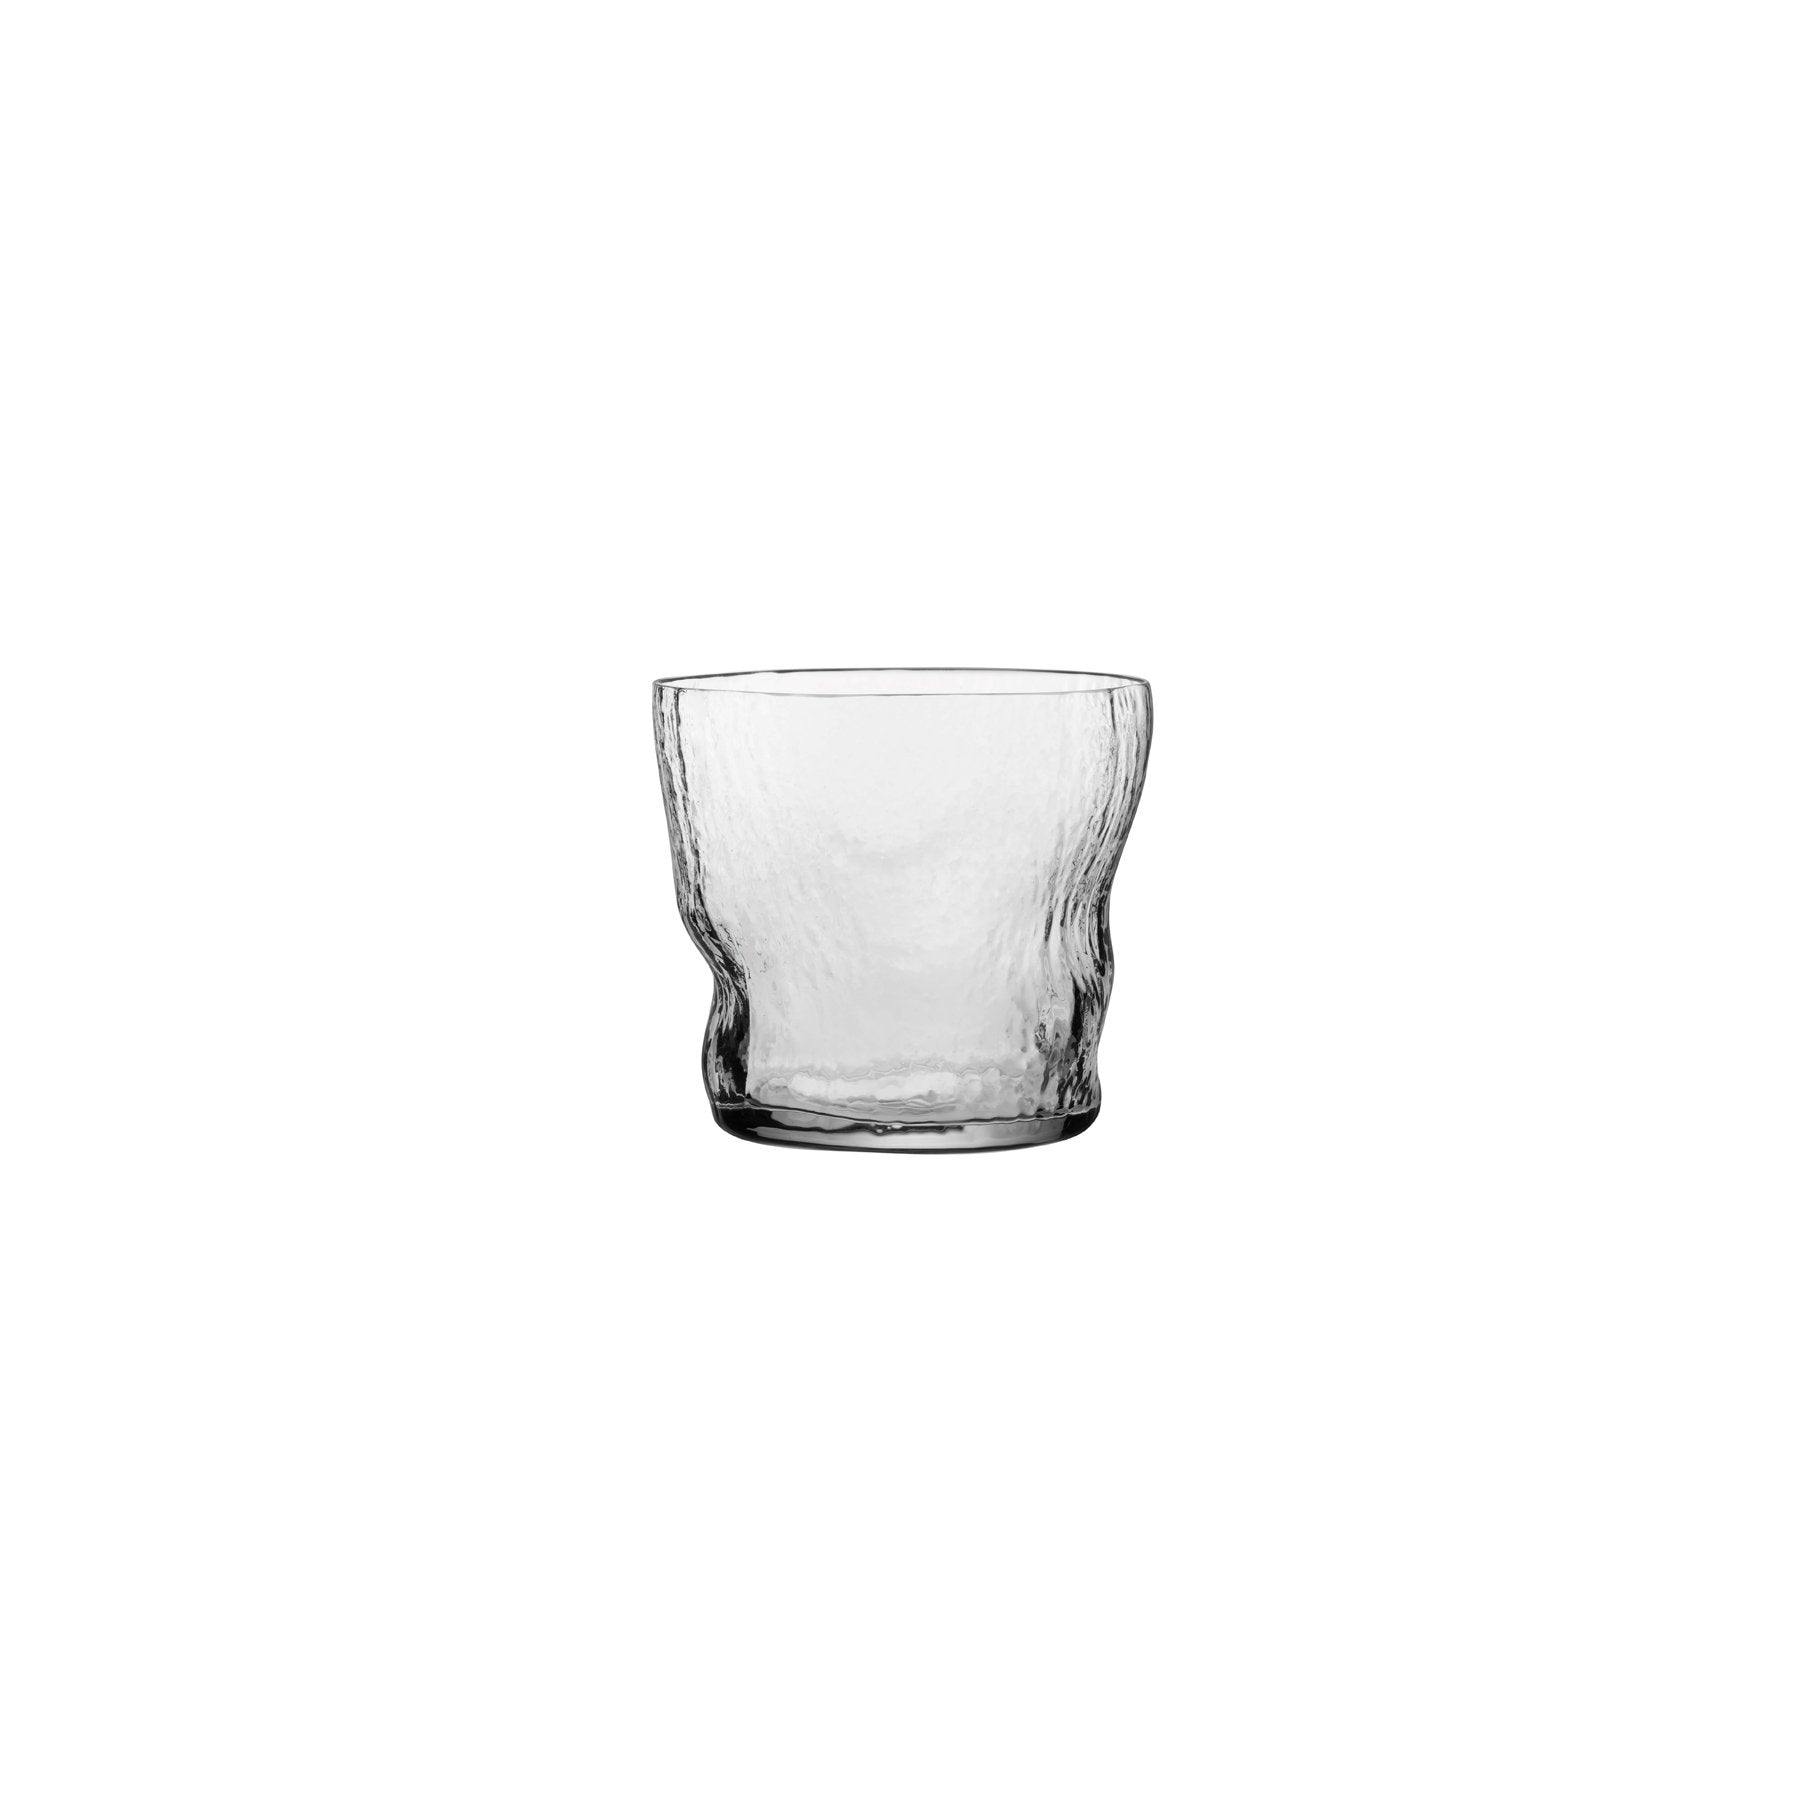 barduck set of 2 glasses by nude at adorn.house 